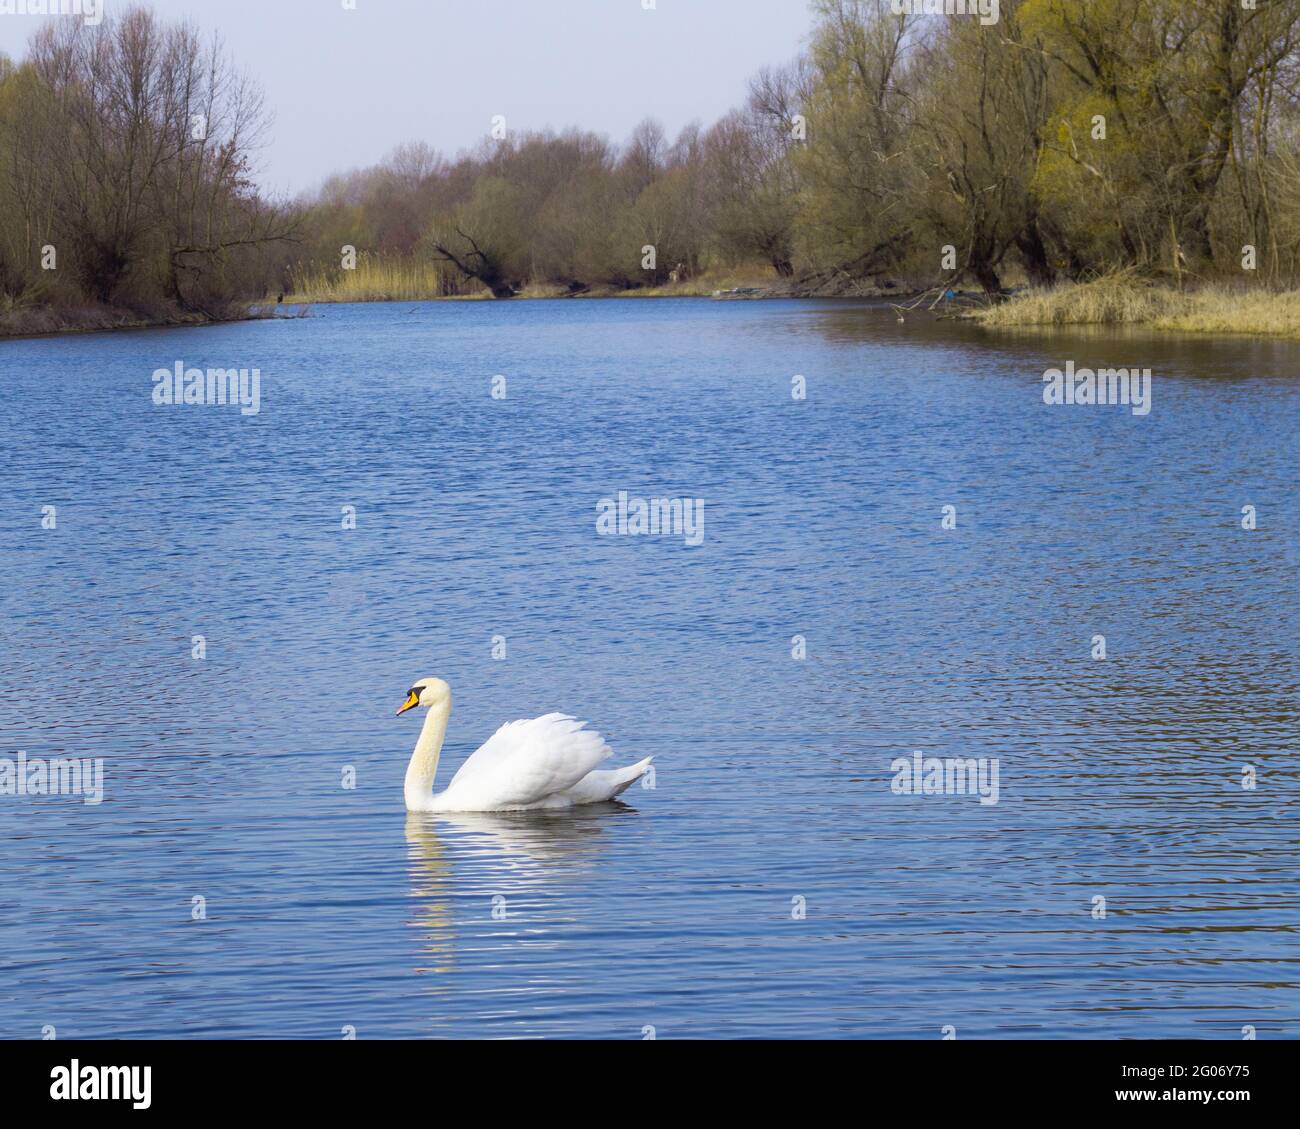 A lone swan swims on the river Stock Photo